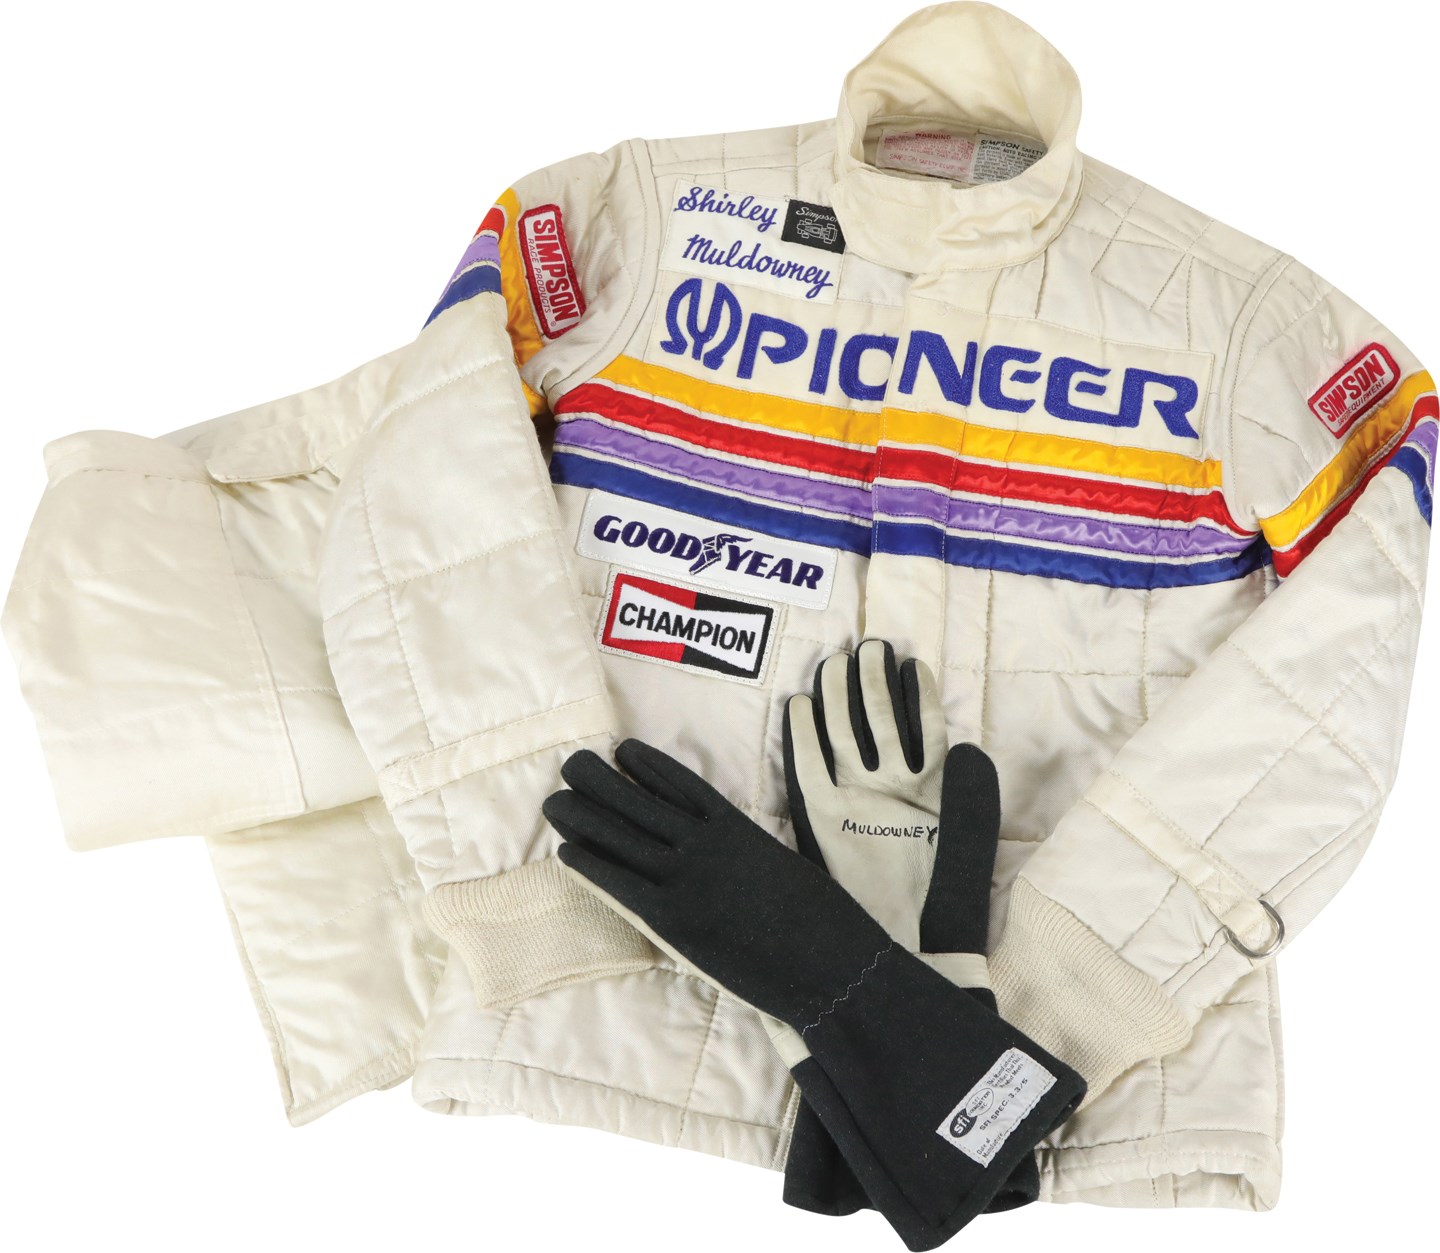 1980s Shirley Muldowney Race Worn Fire Suit and Gloves